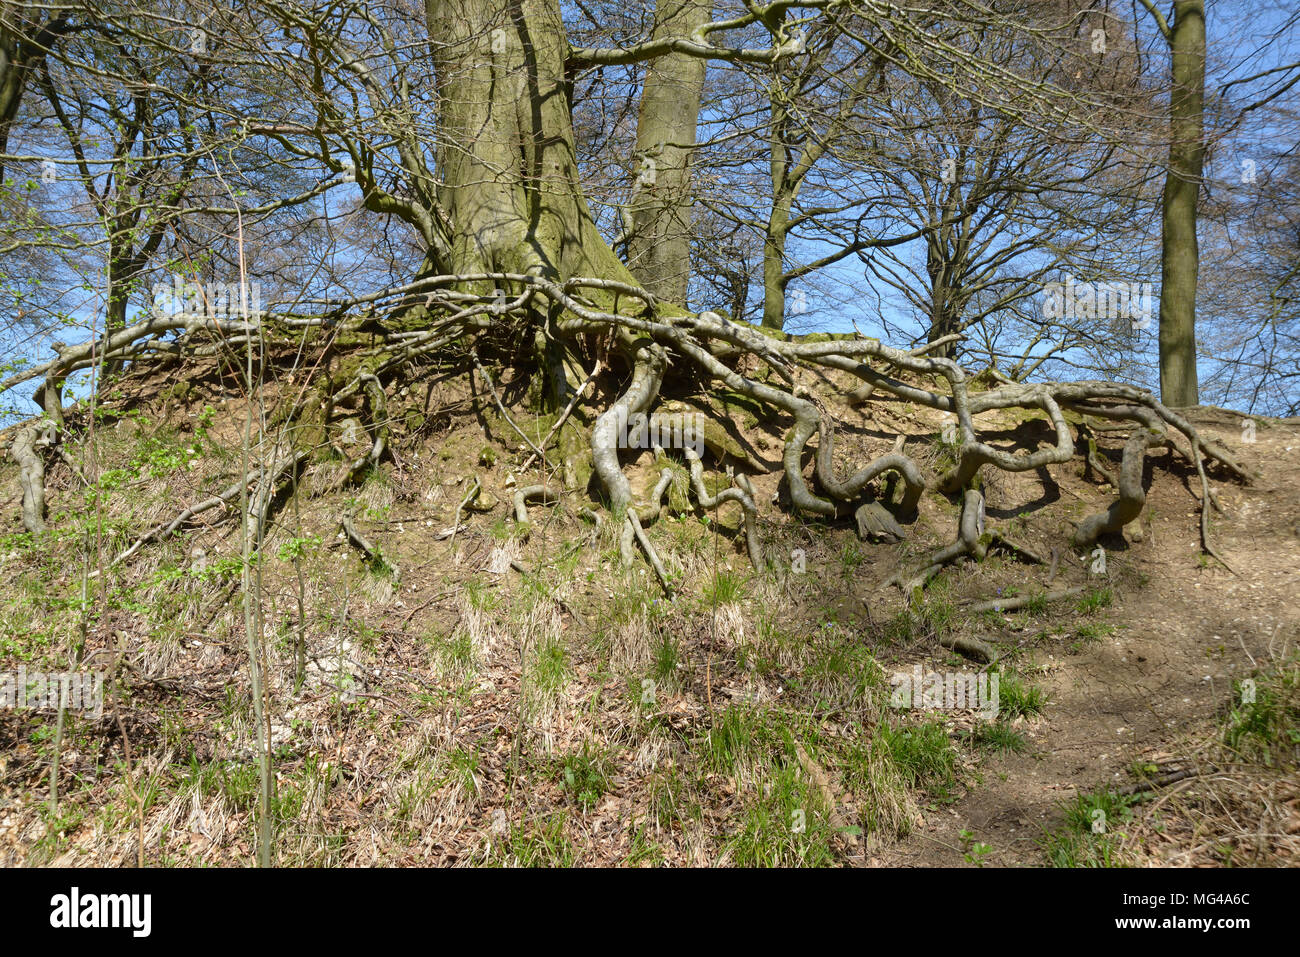 Tree with Exposed roots, Aston Rowant, woods. Stock Photo